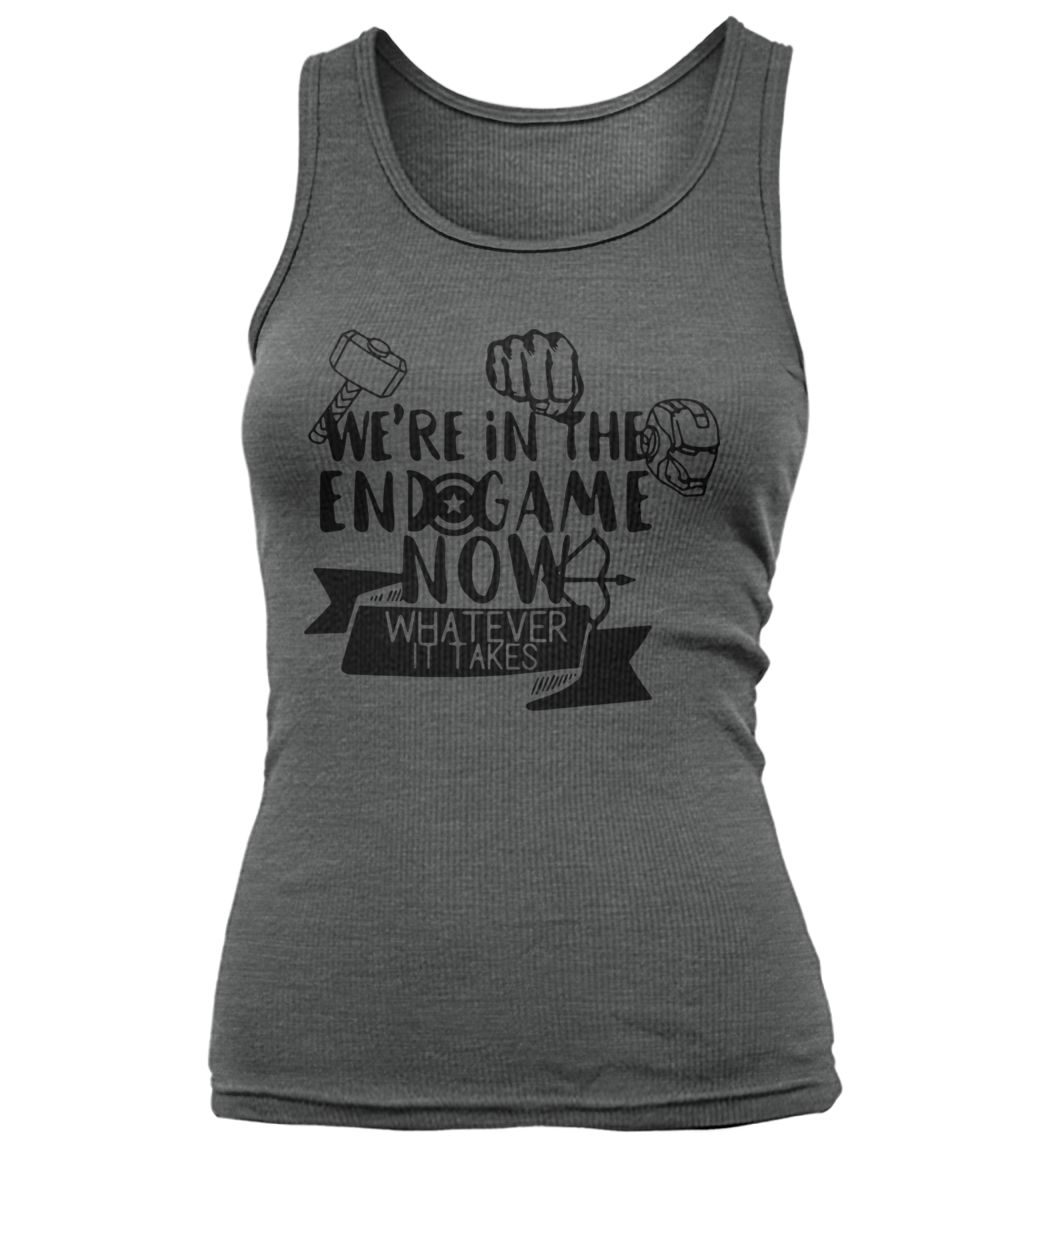 Marvel avengers we're in the Endgame now whatever it takes women's tank top